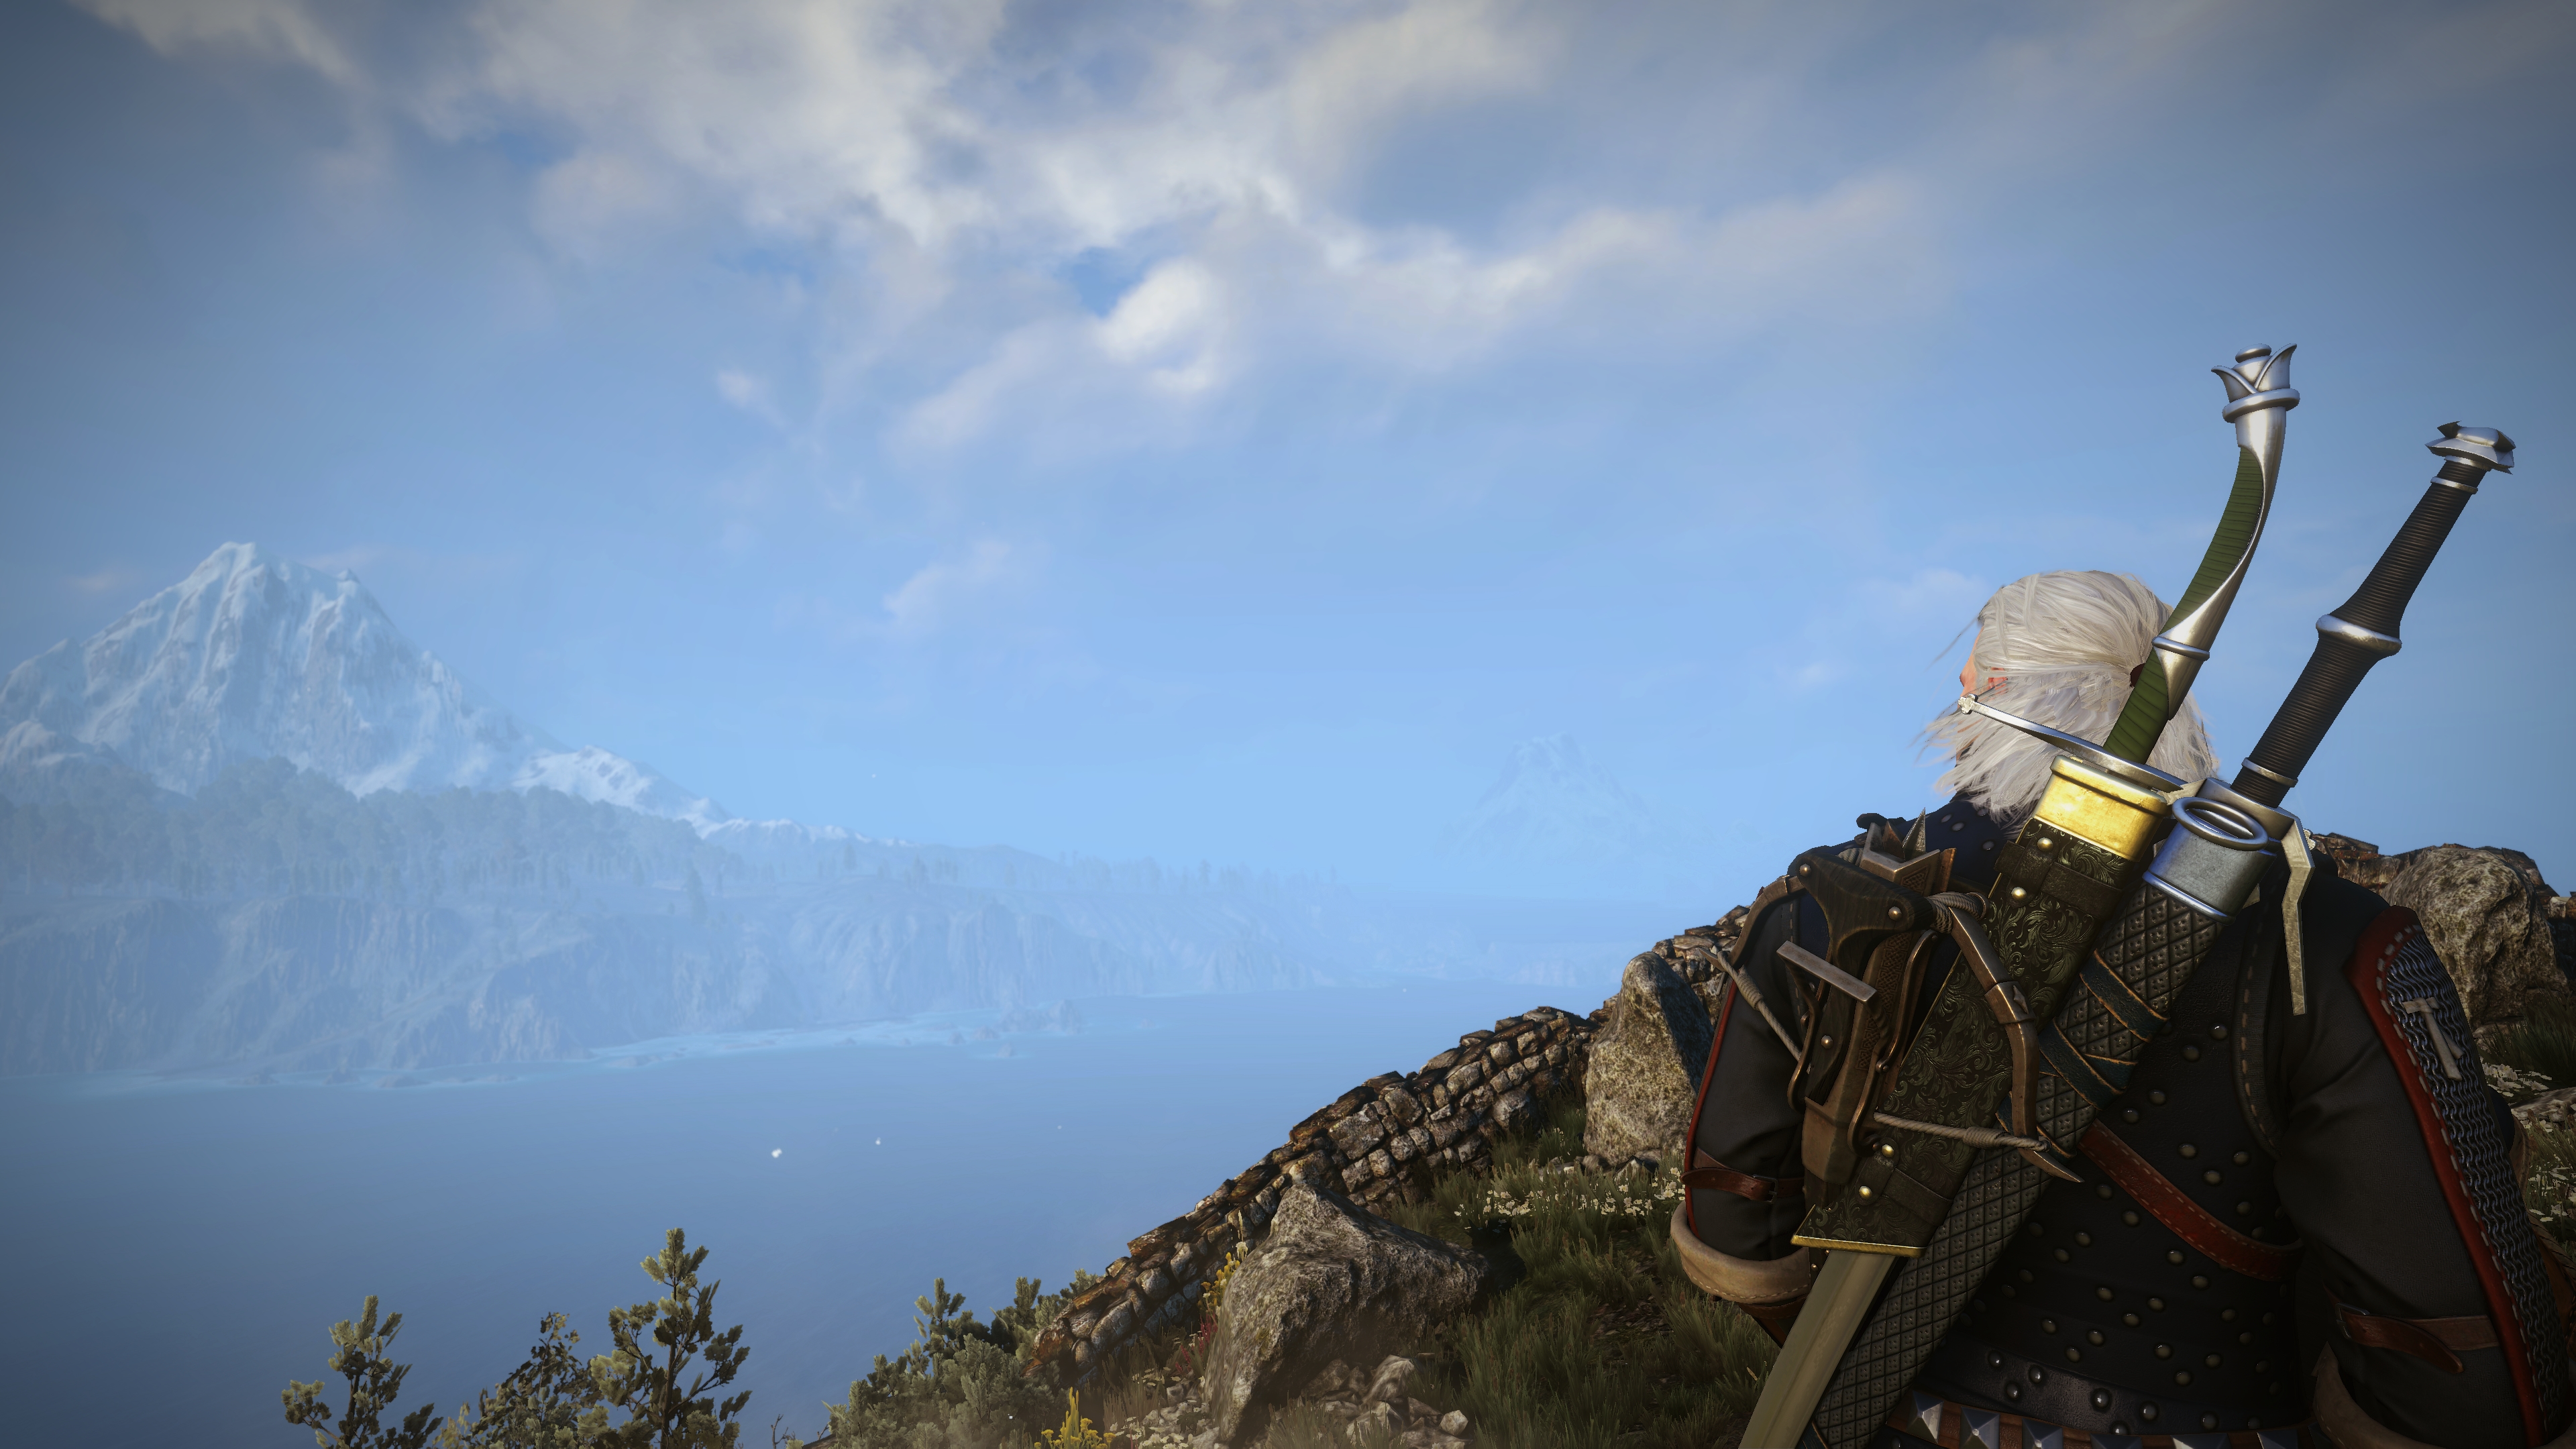 Geralt of Rivia, The Witcher 3: Wild Hunt, Noonwraith, Screen shot, The Witcher Wallpaper